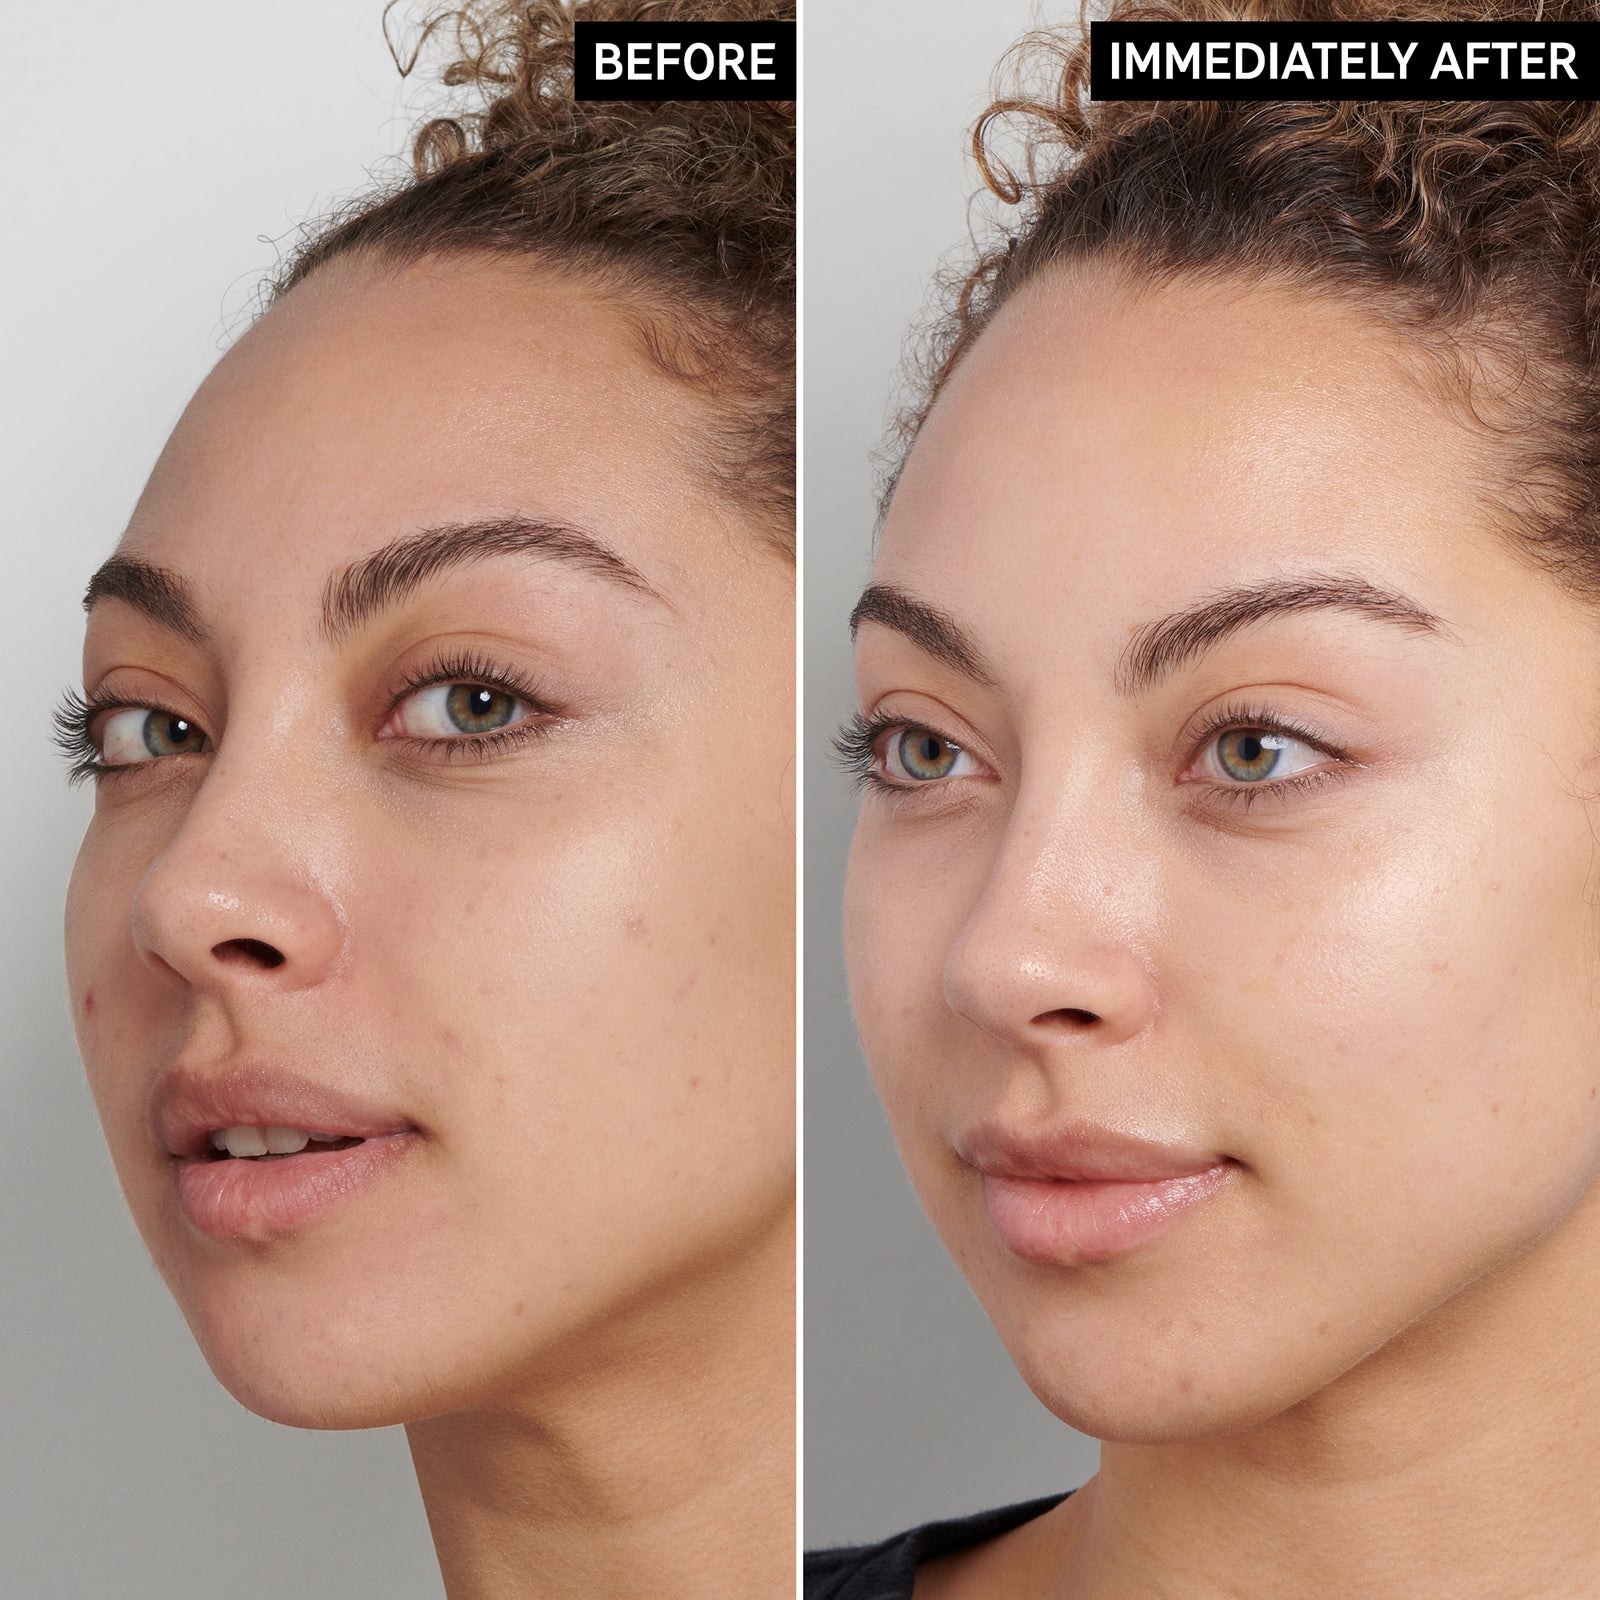 2 images of a model's face side by side to show before and after using Fulvic Acid Cleanser